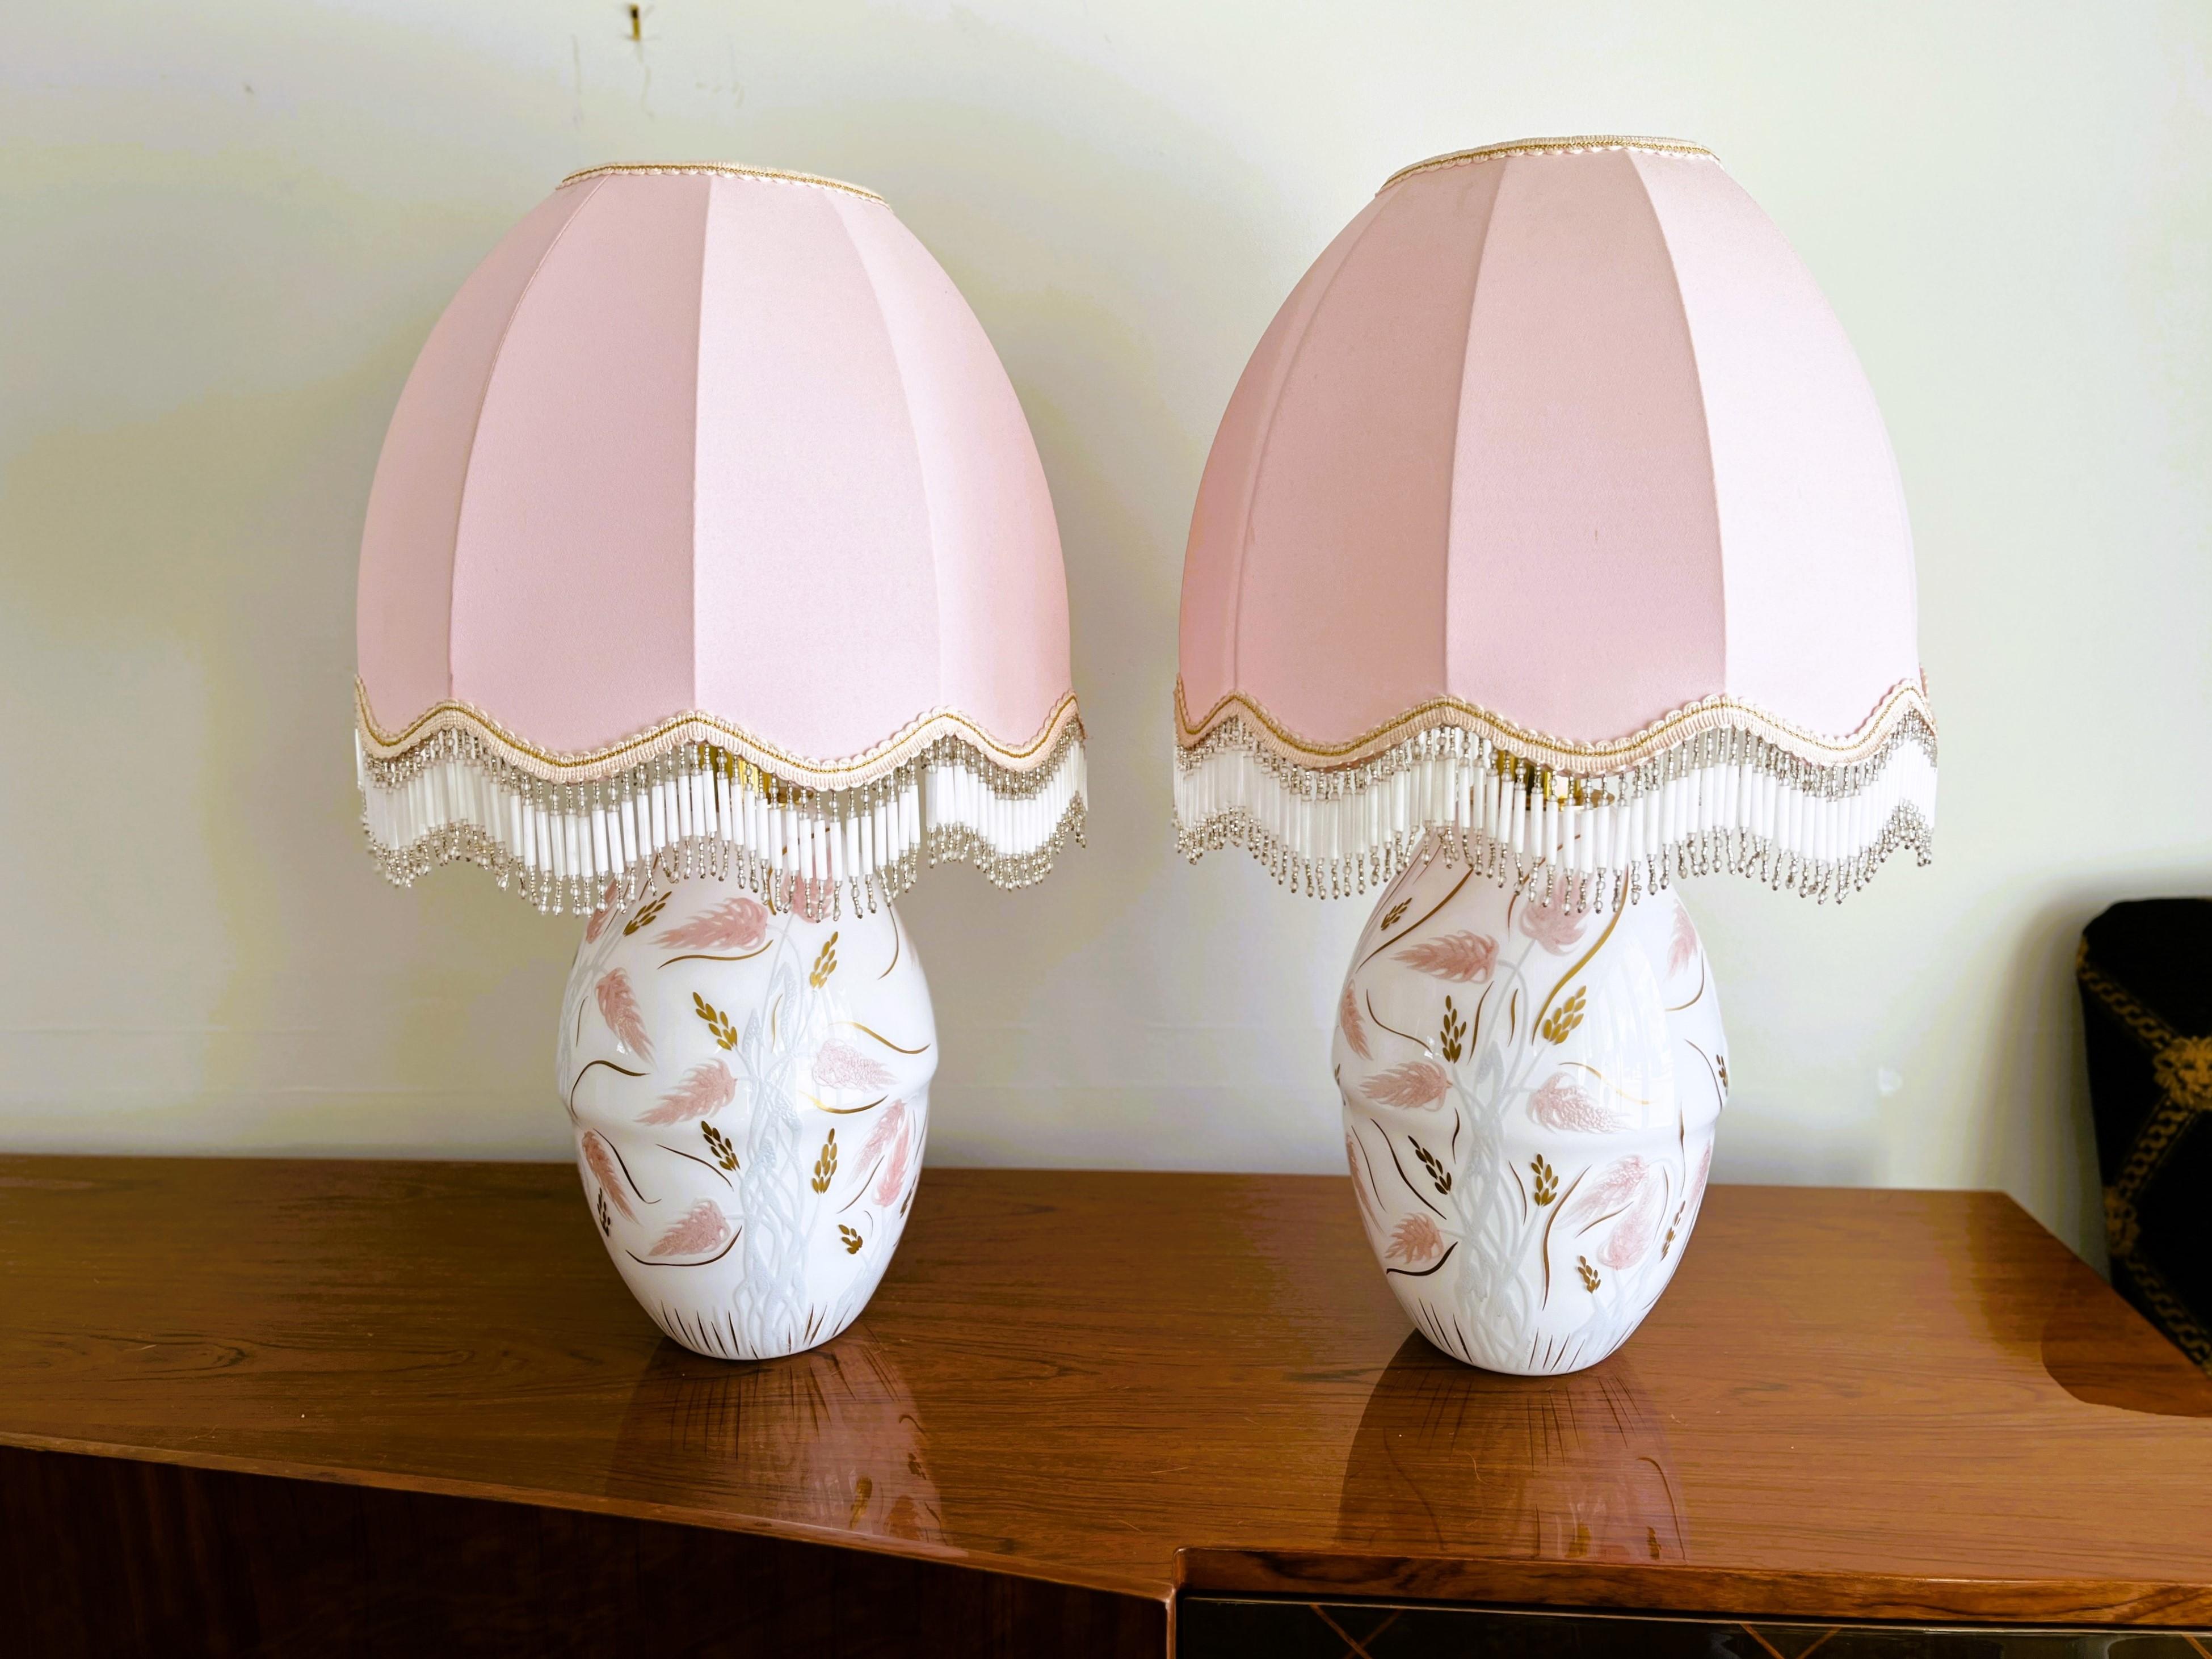 A rare pair of Murano De Baisi table lamps. Hand-painted in pink, gold and light blue. Hand-signed, Lavorazione a Mano (handmade) Mario De Biasi.